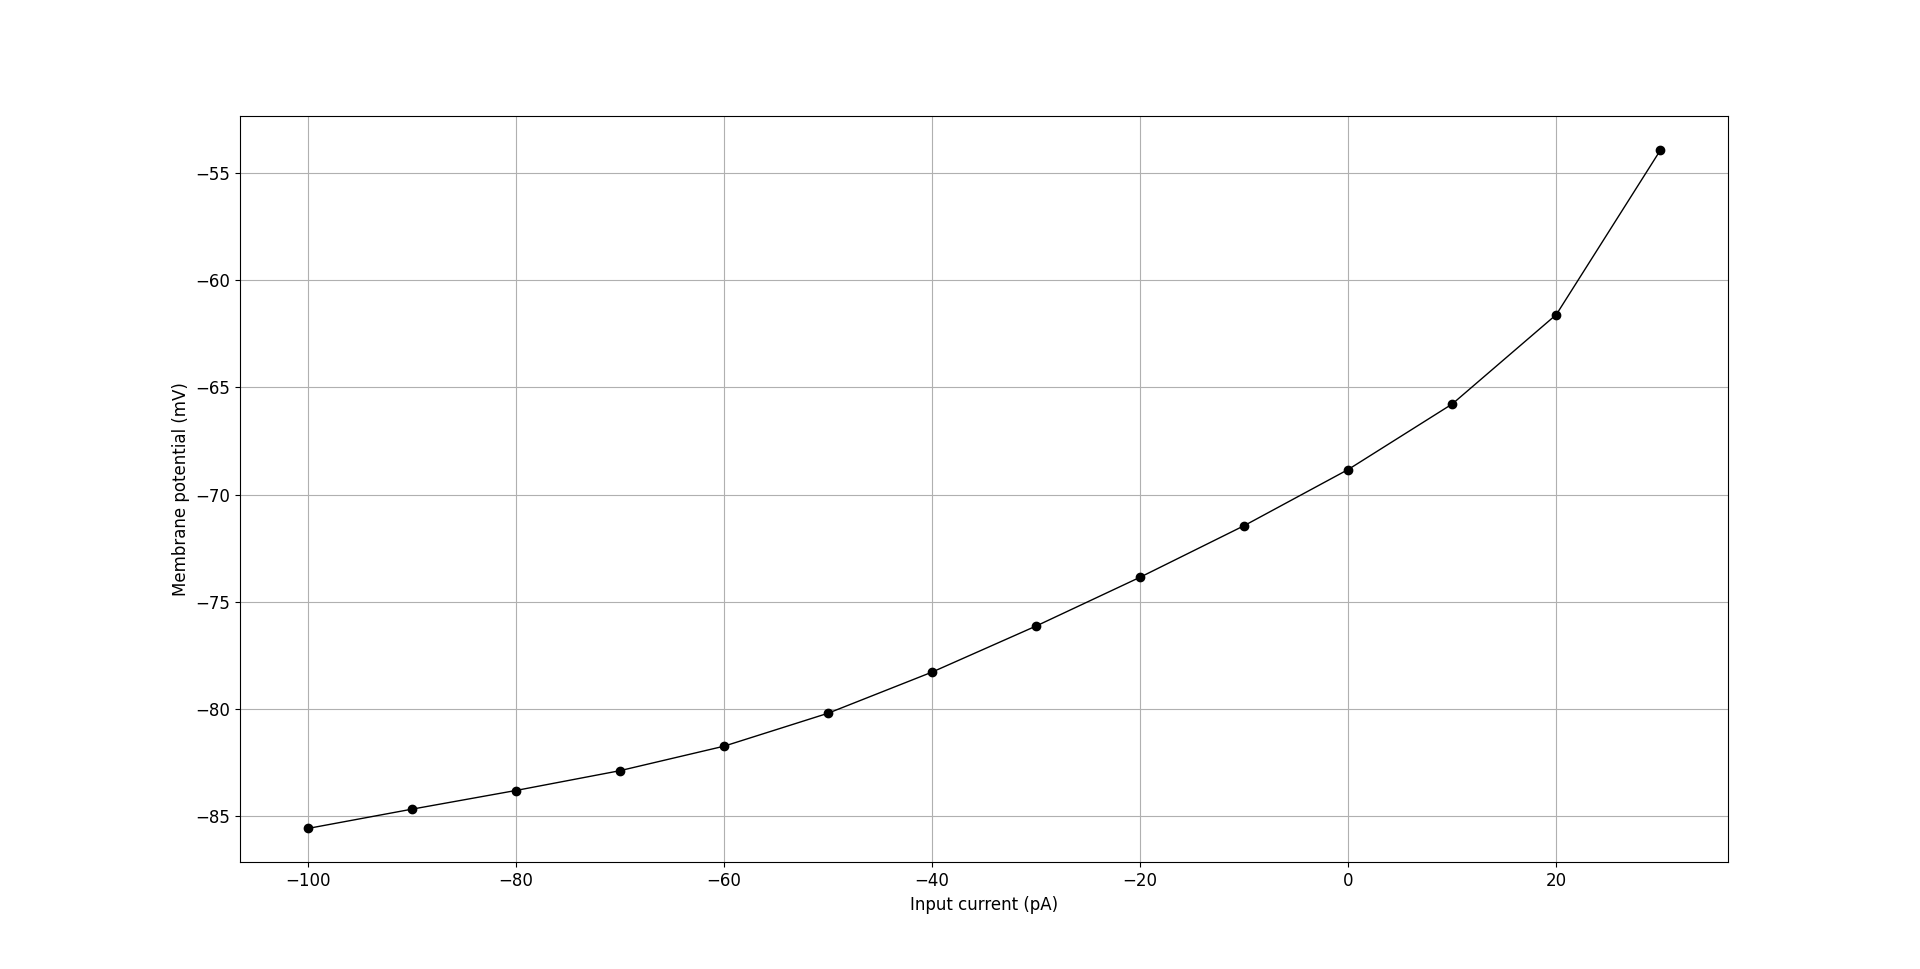 Current vs sub-threshold voltage curve for OLM cell generated using `generate_current_vs_frequency_curve`.